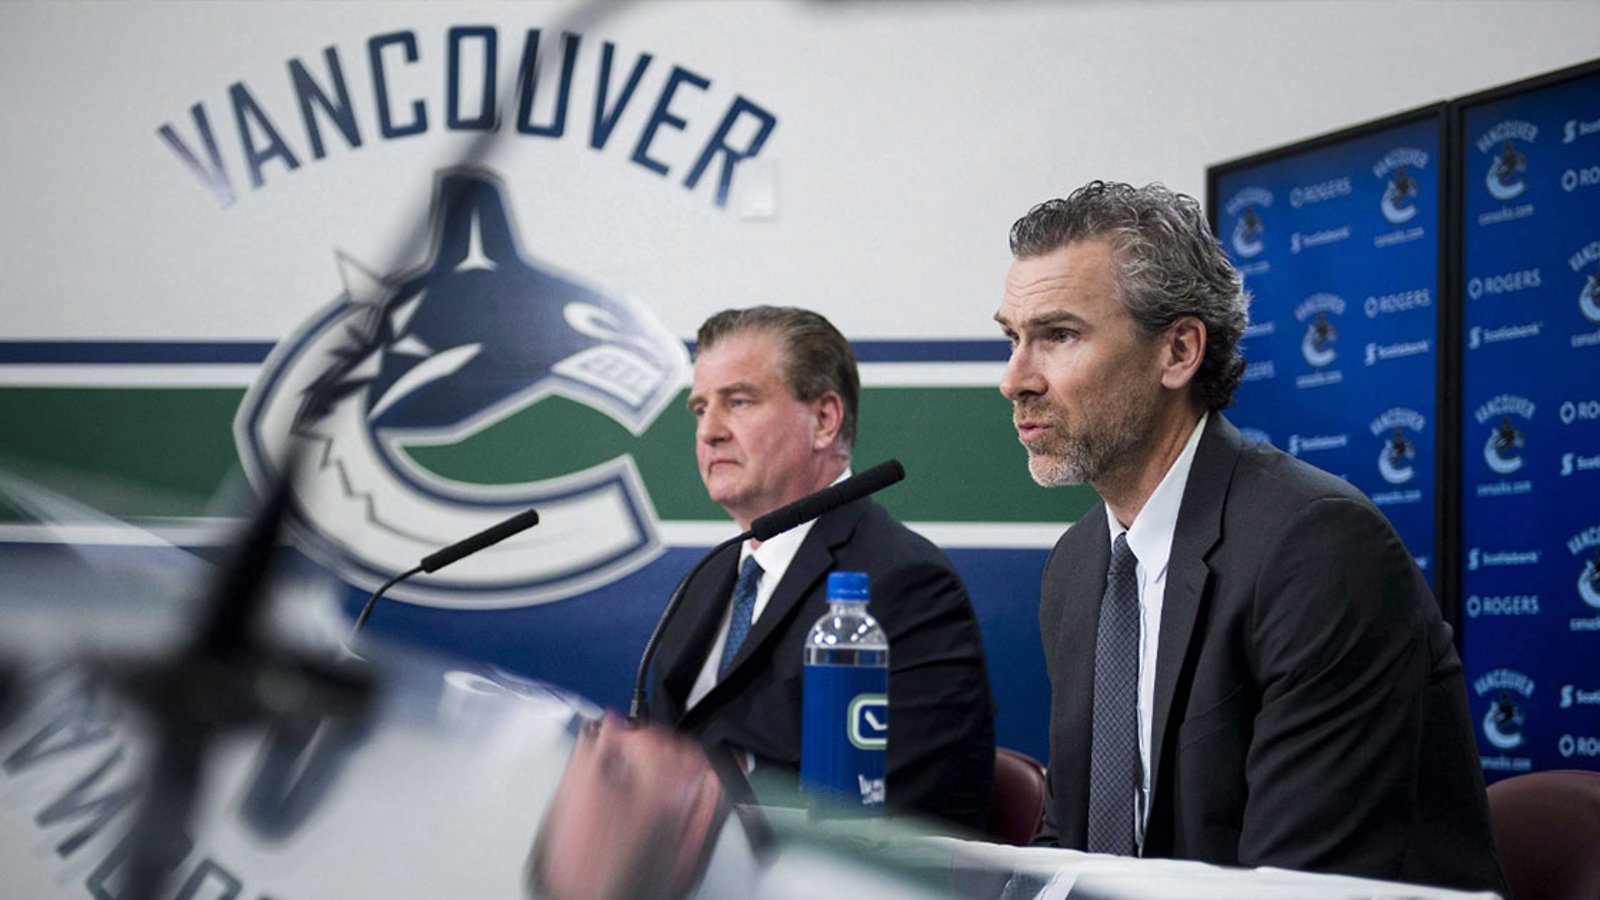 Canucks fans rip apart Linden and Benning in latest THN poll